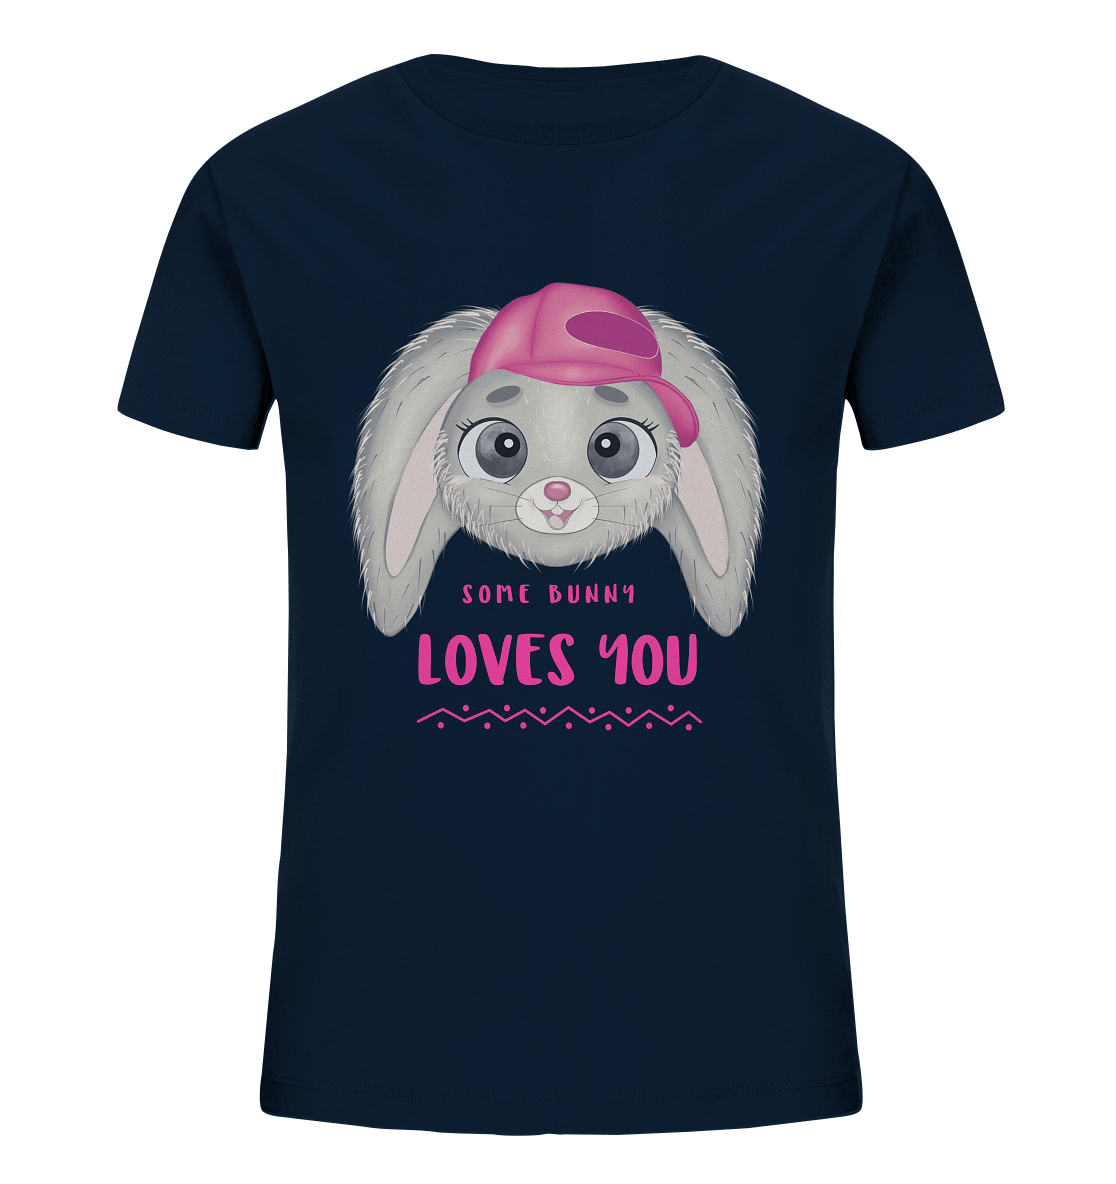 Süßes Cartoon Hase T-Shirt Some Bunny loves you Kinder T-Shirt in navy blau von Bloominic